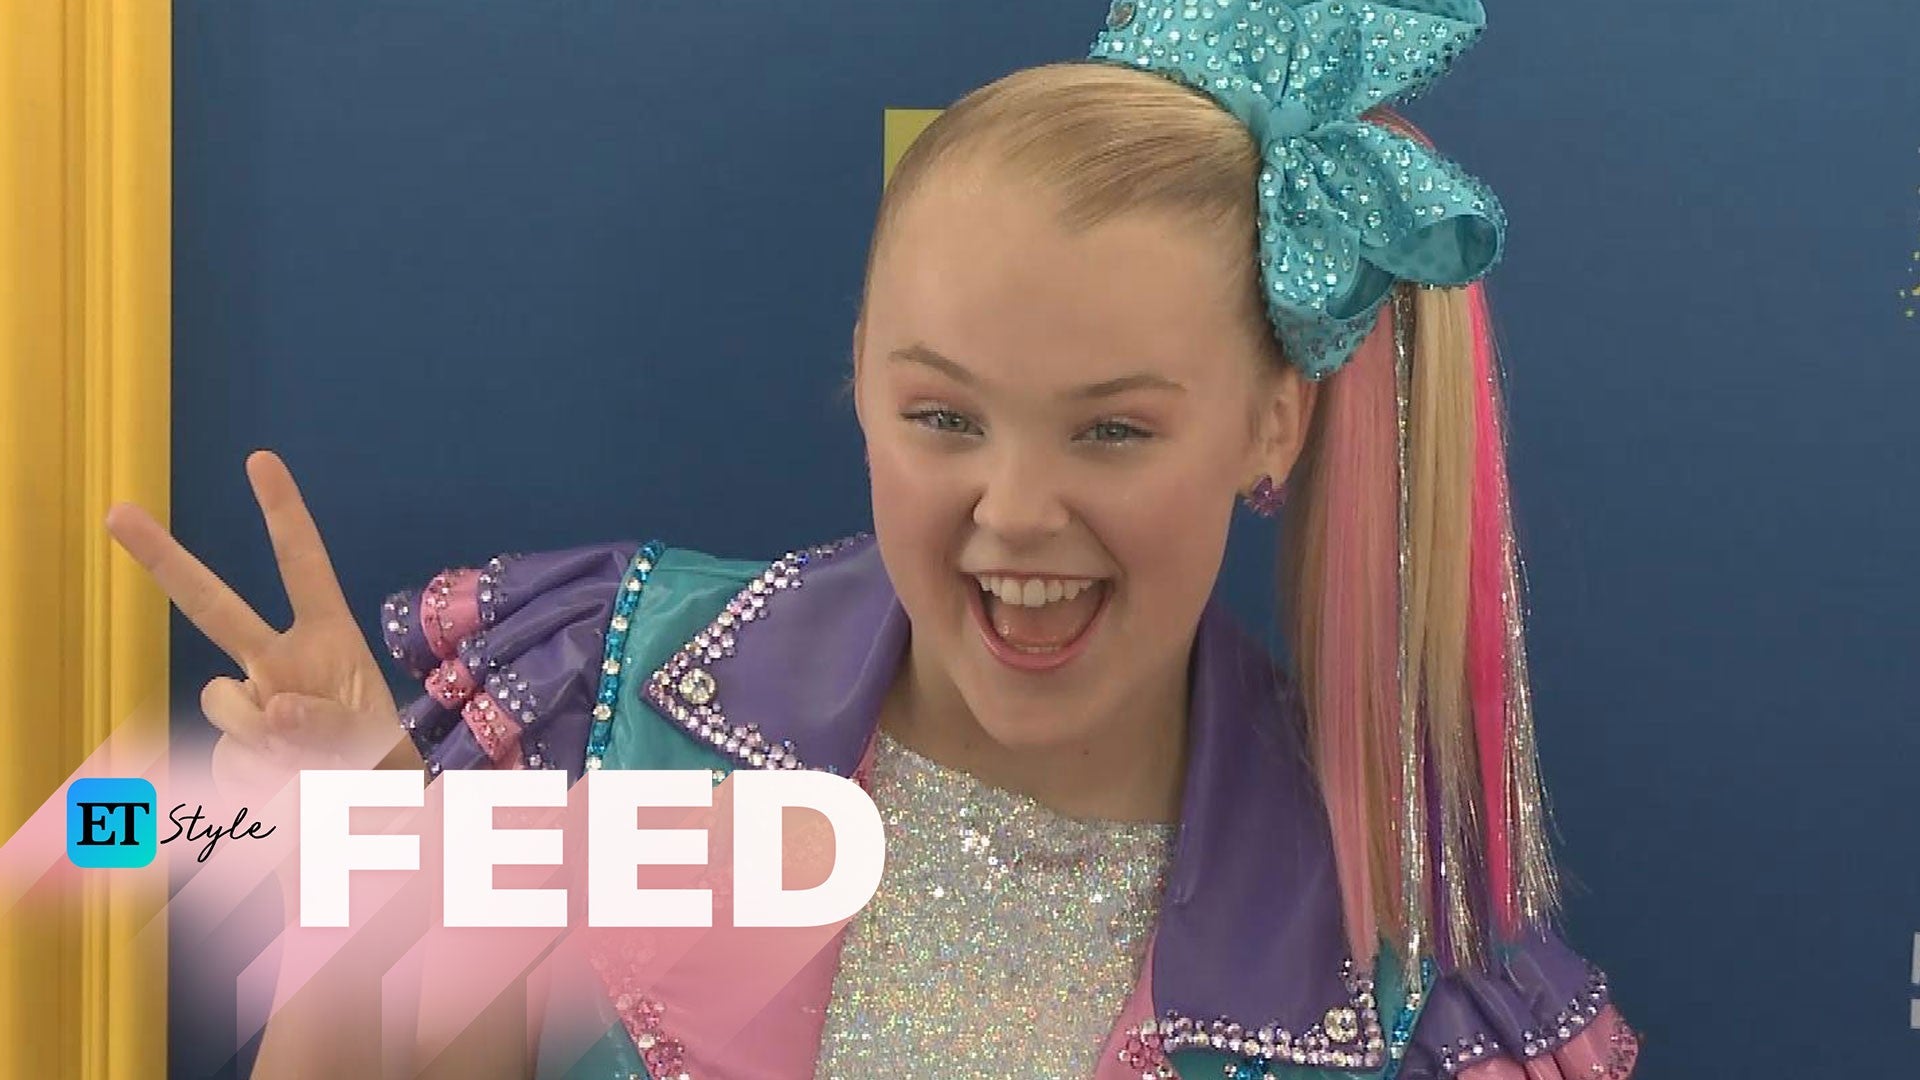 JoJo Siwa Speaks Out About Claire's Makeup Recalled Over Asbestos